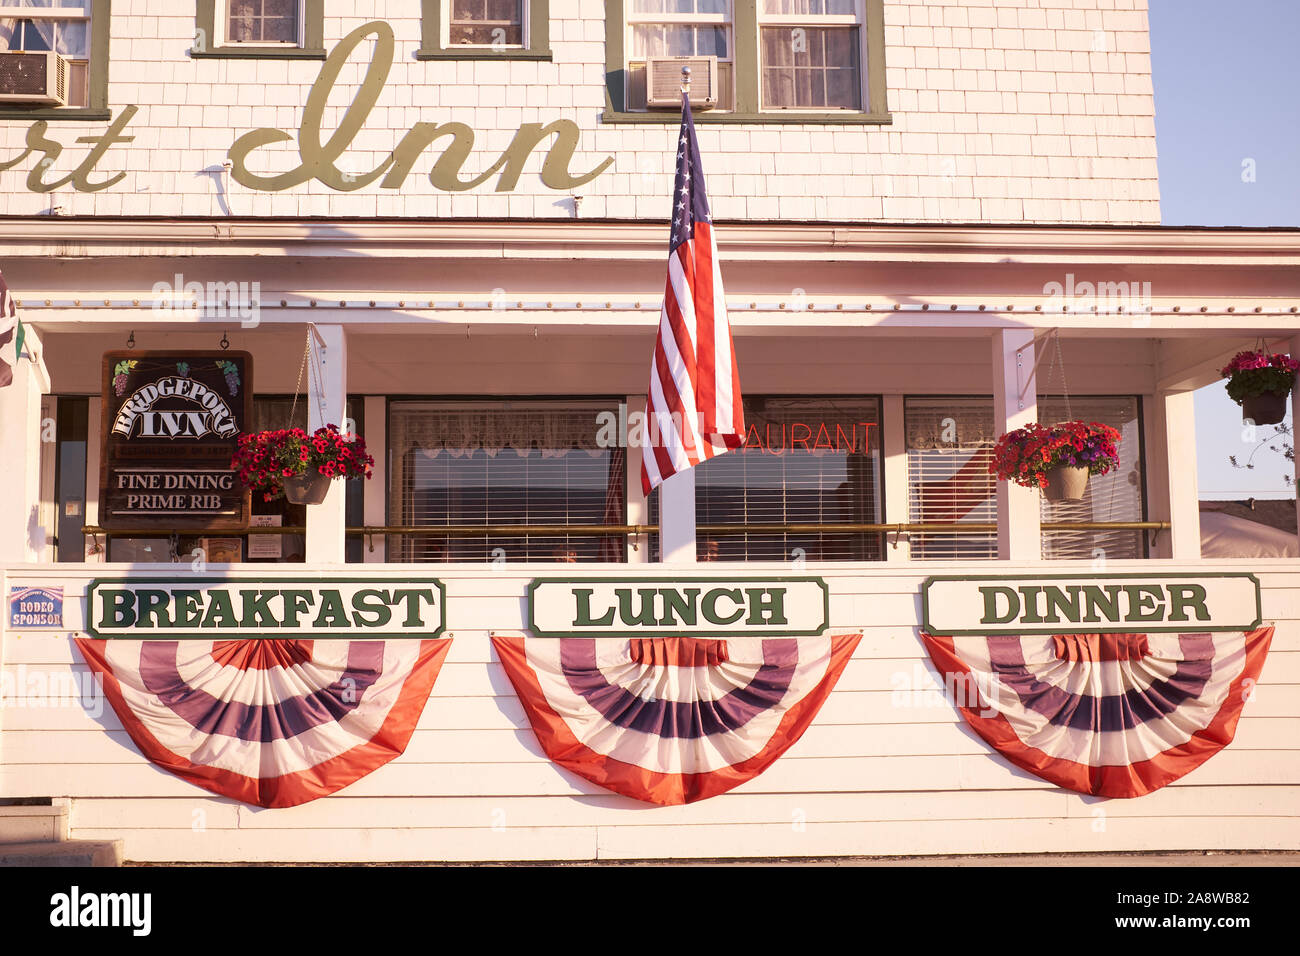 Breakfast, Luch, Dinner in the town of Bridgeport, California, prepares for the 4th of July celebrations. Stock Photo